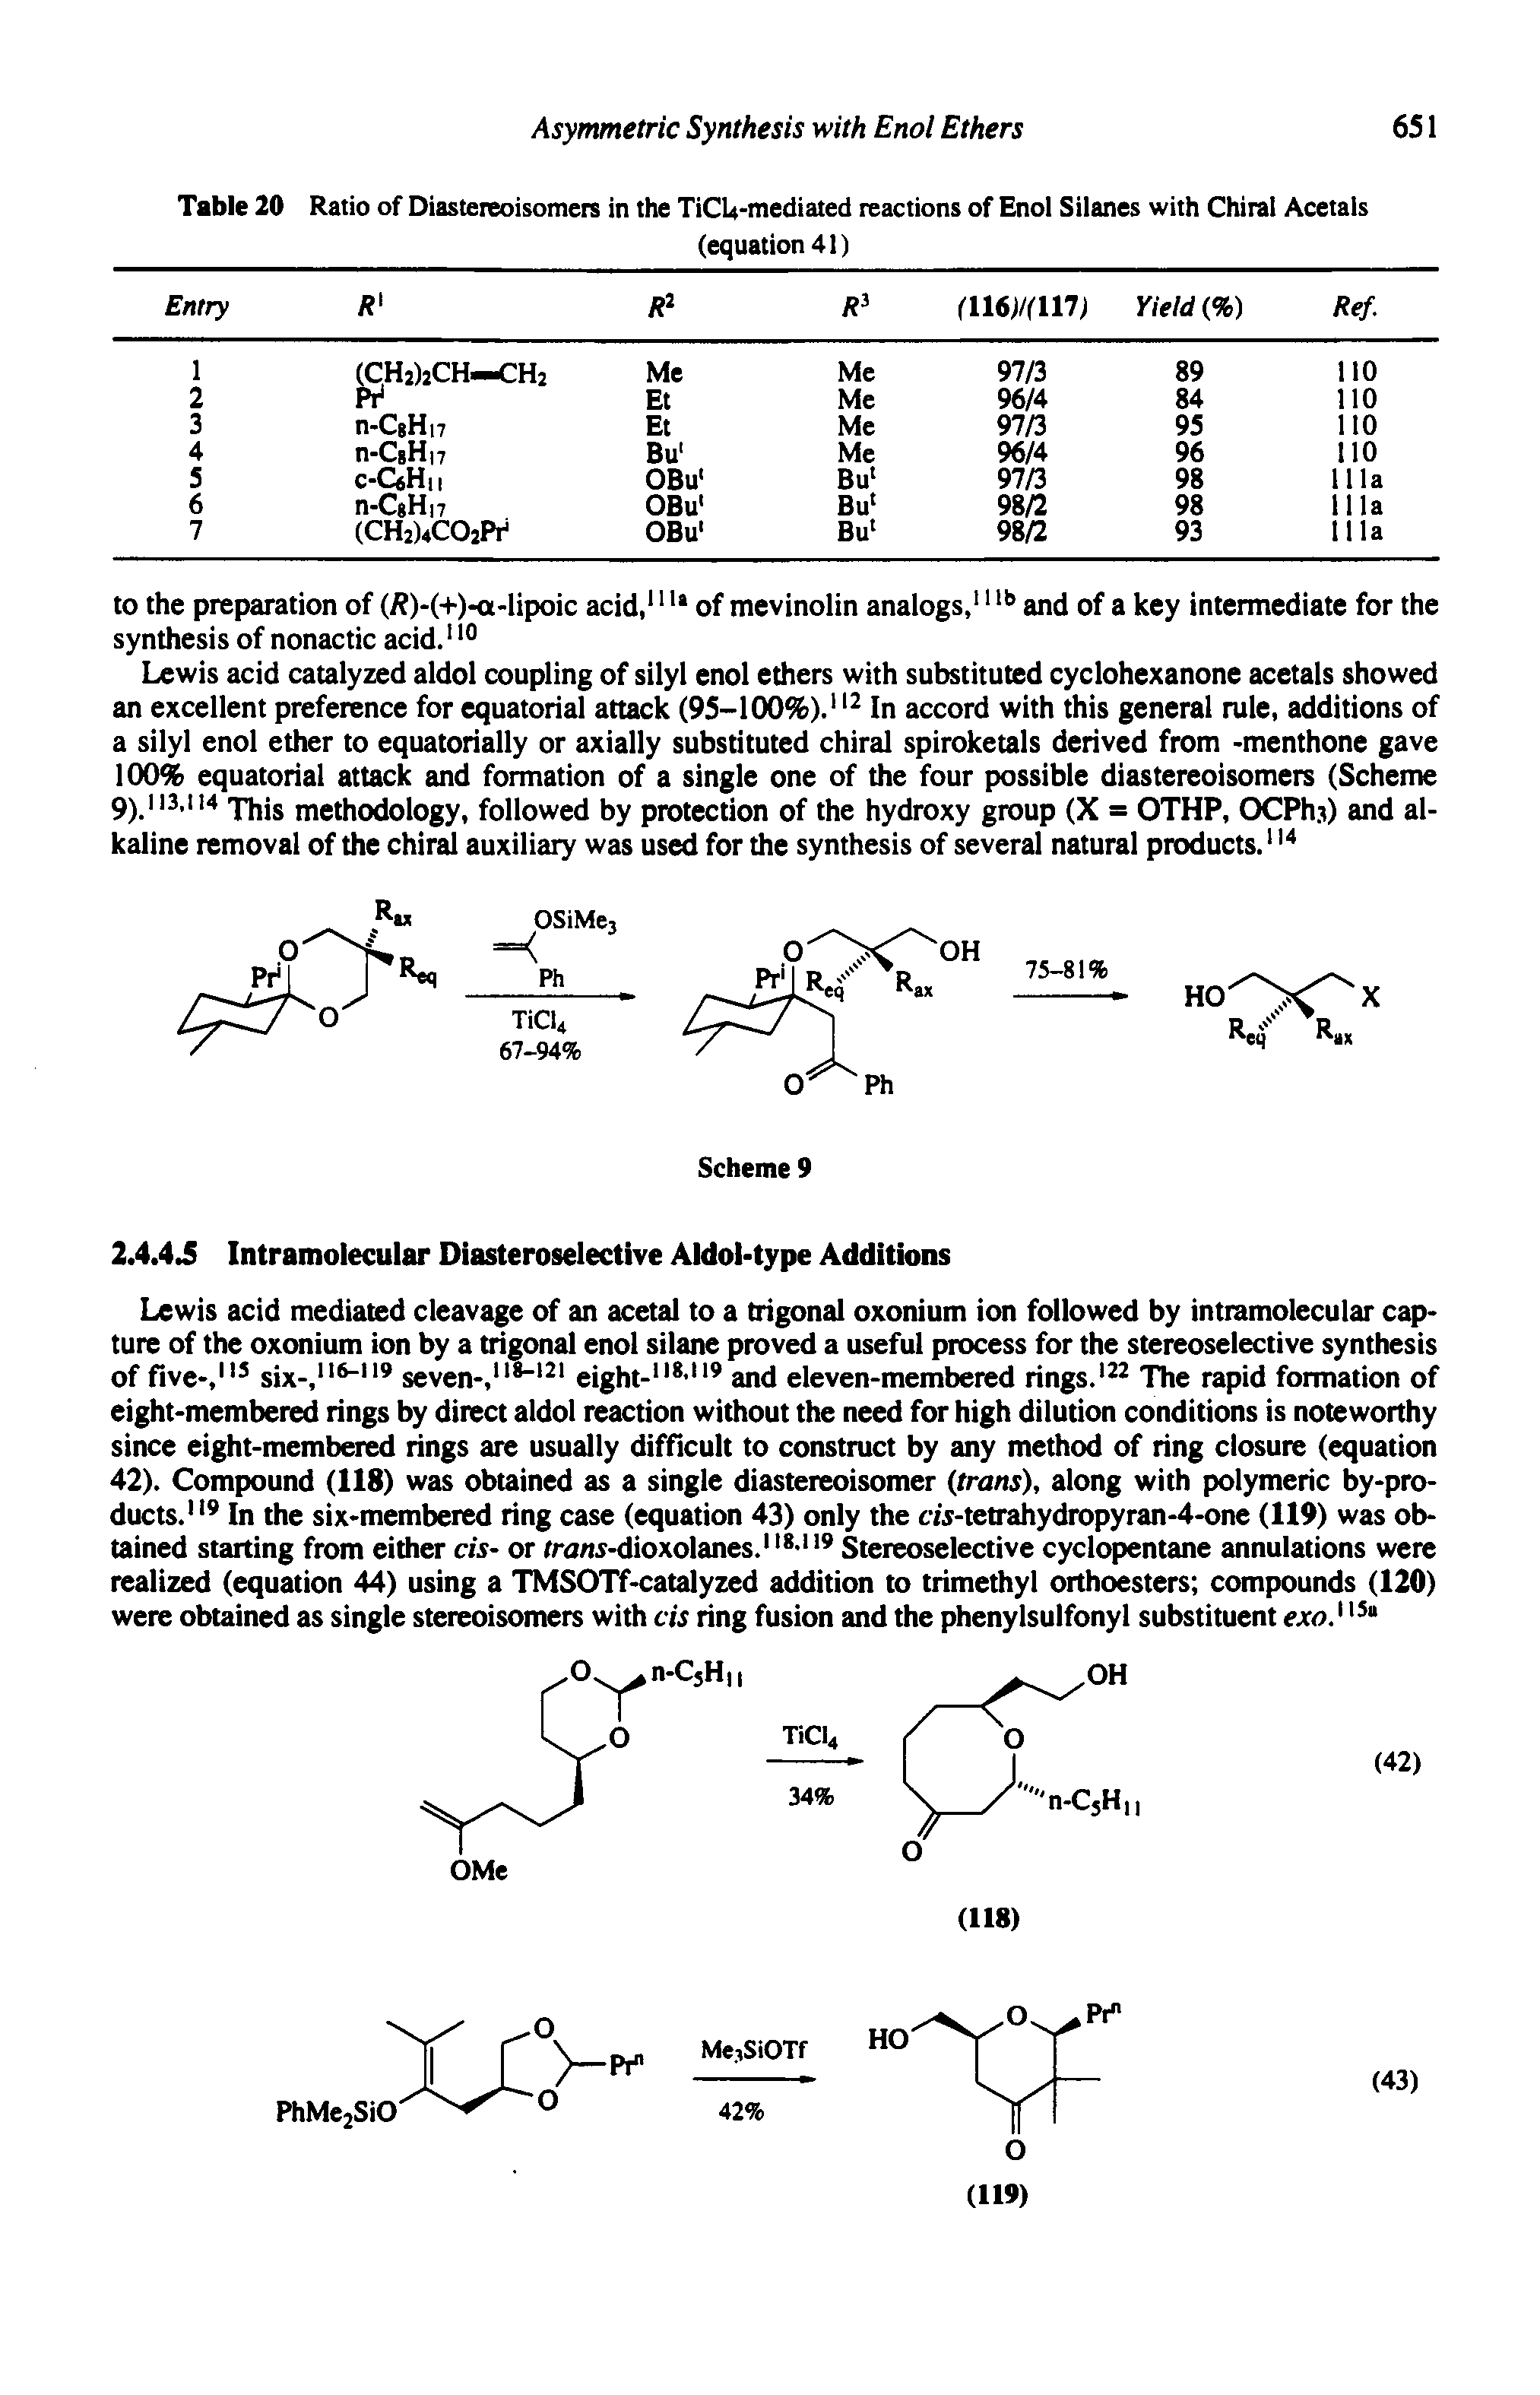 Table 20 Ratio of Diastereoisomers in the TiCU-mediated reactions of Enol Silanes with Chiral Acetals...